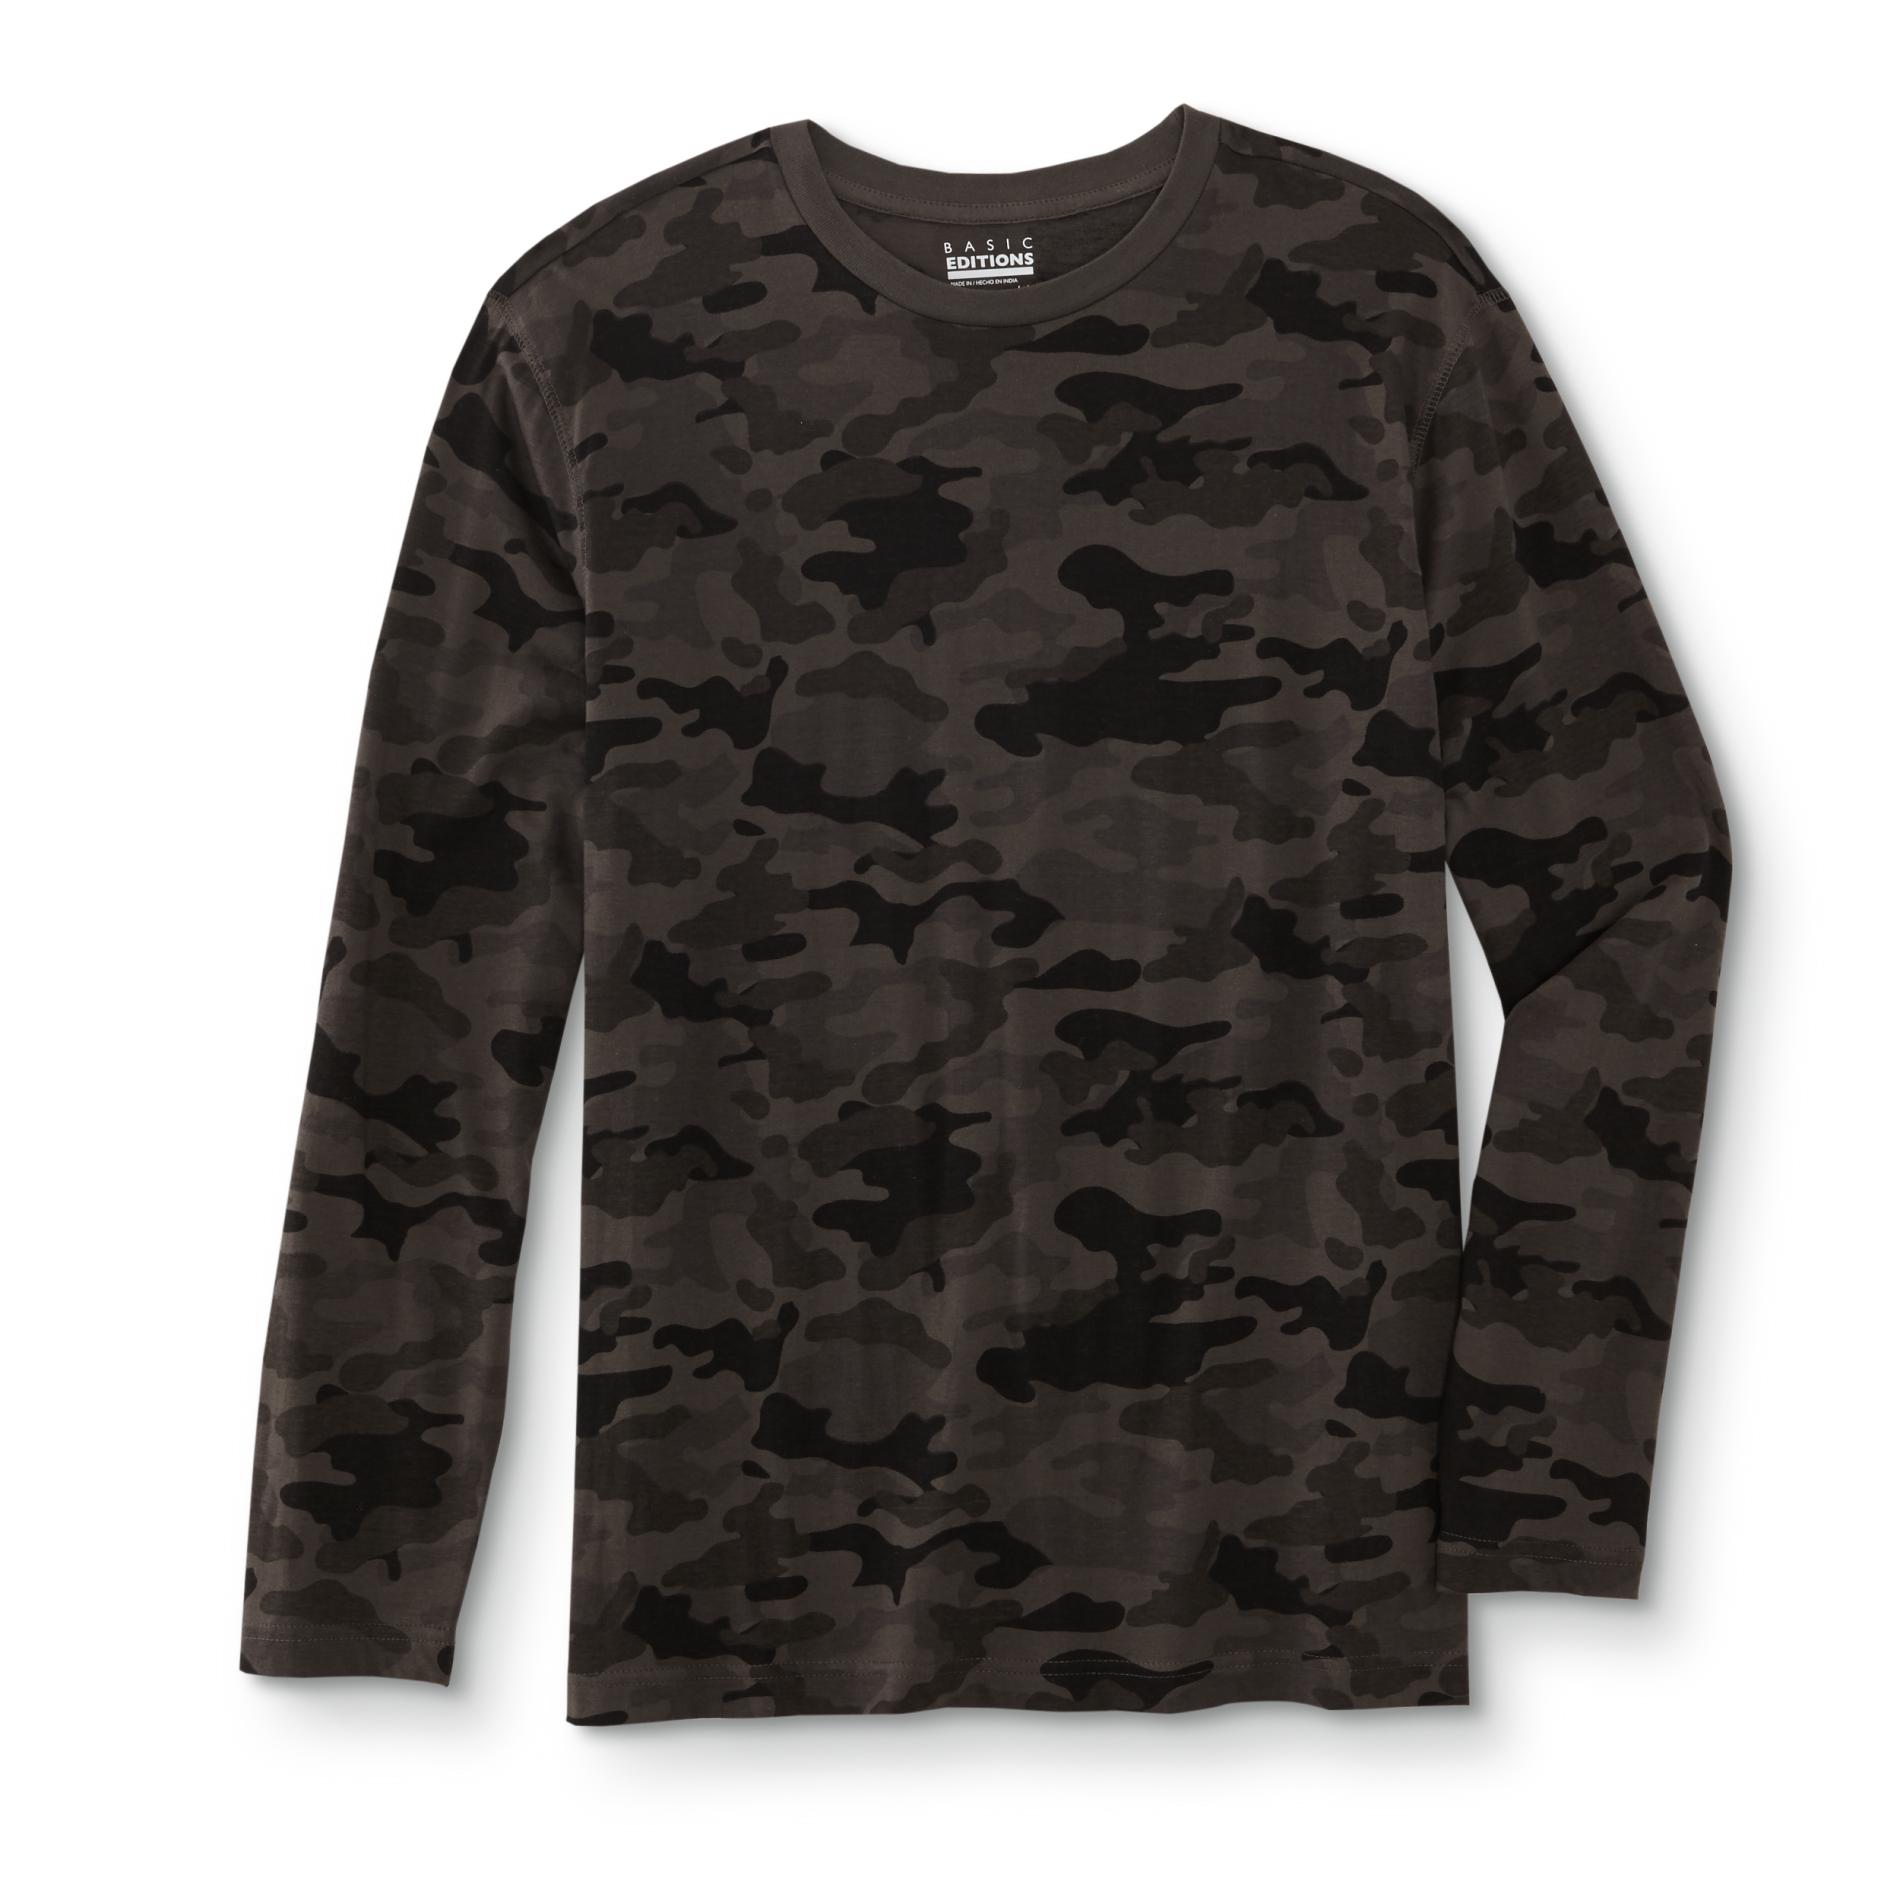 Basic Editions Men's Long-Sleeve T-Shirt - Camouflage